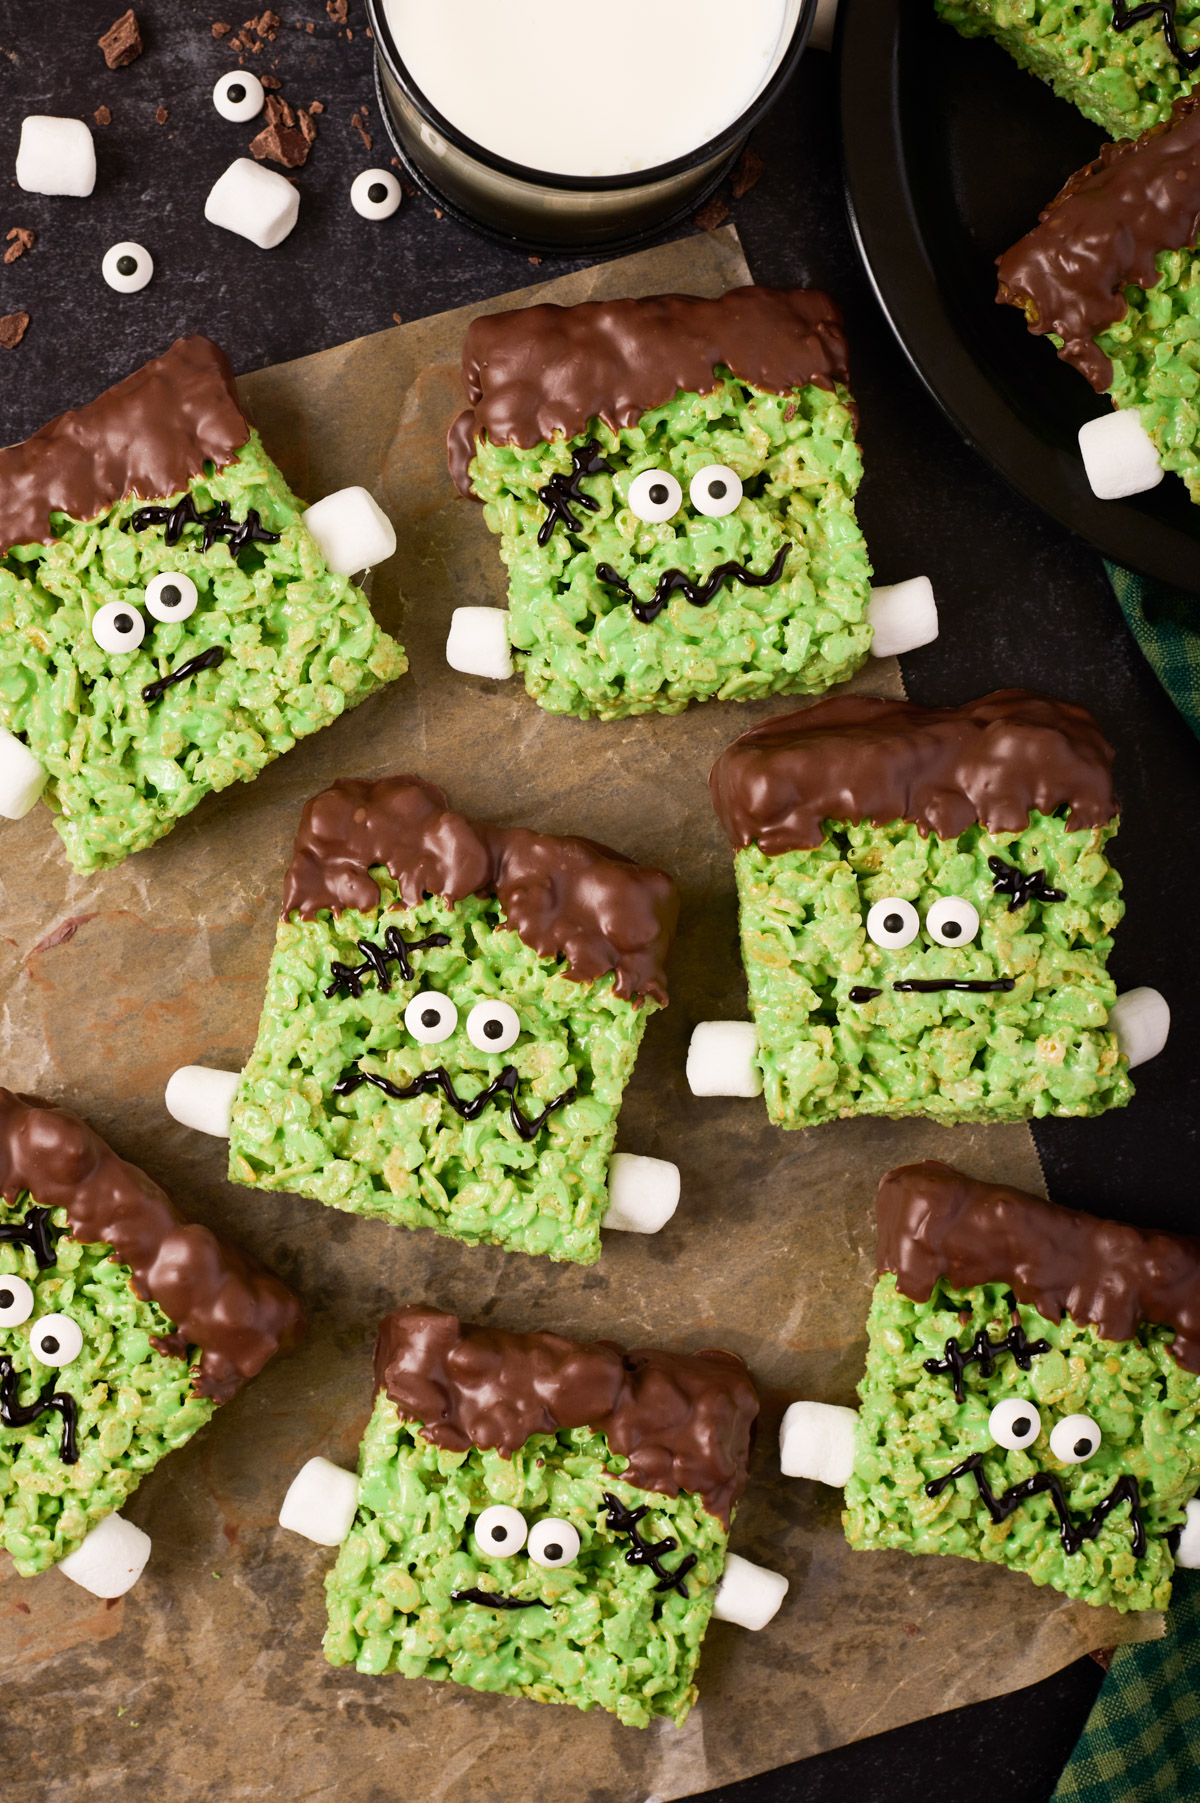 Frankenstein rice krispie treats sit on a piece of wax paper surrounded by more rice krispie treats, candy eyes, chocolate pieces, a glass of milk and green linen on a black background